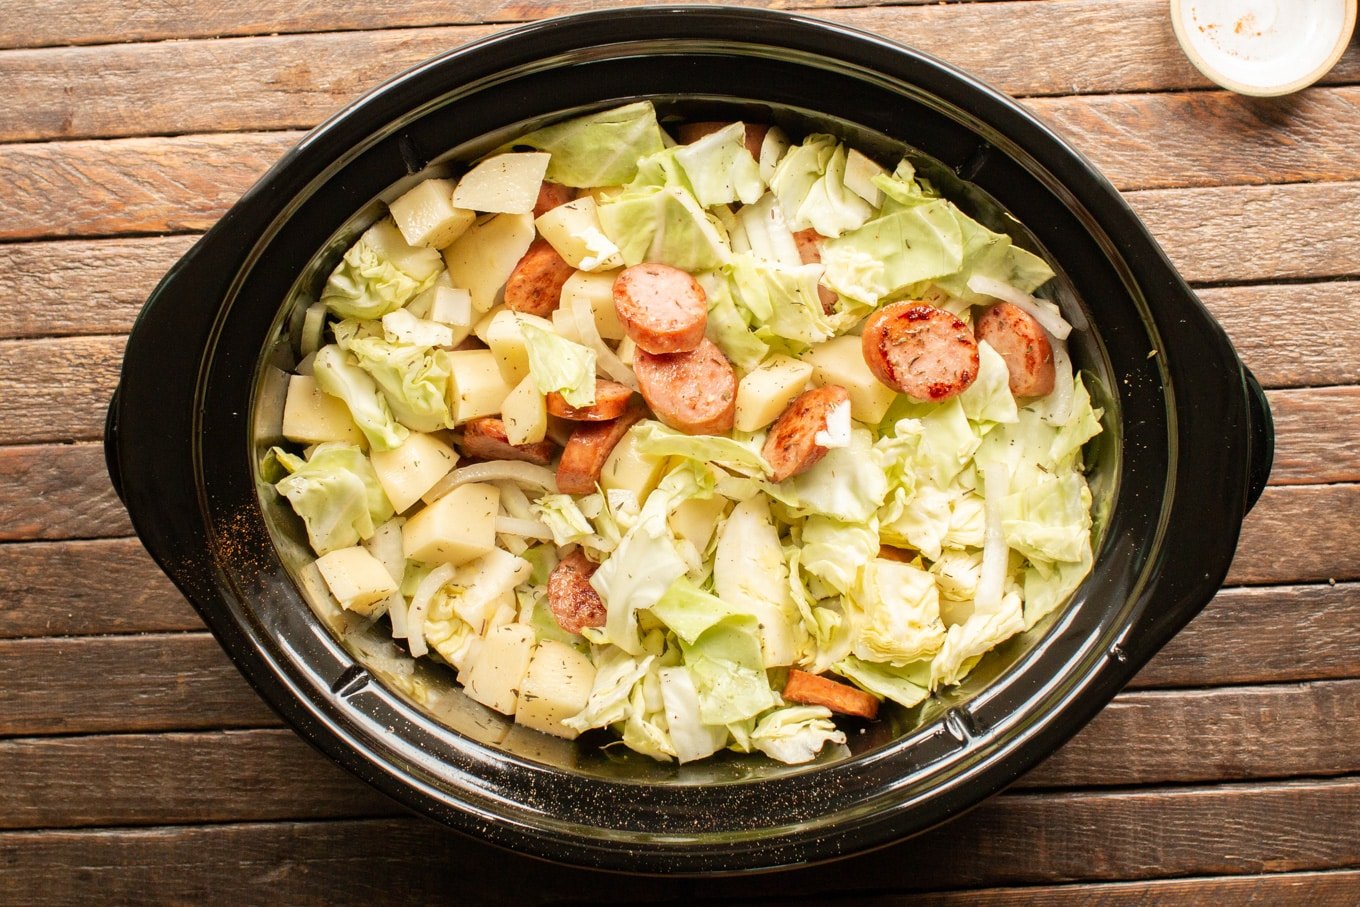 cabbage, potatoes, onions and kielbasa mixed together in a slow cooker.